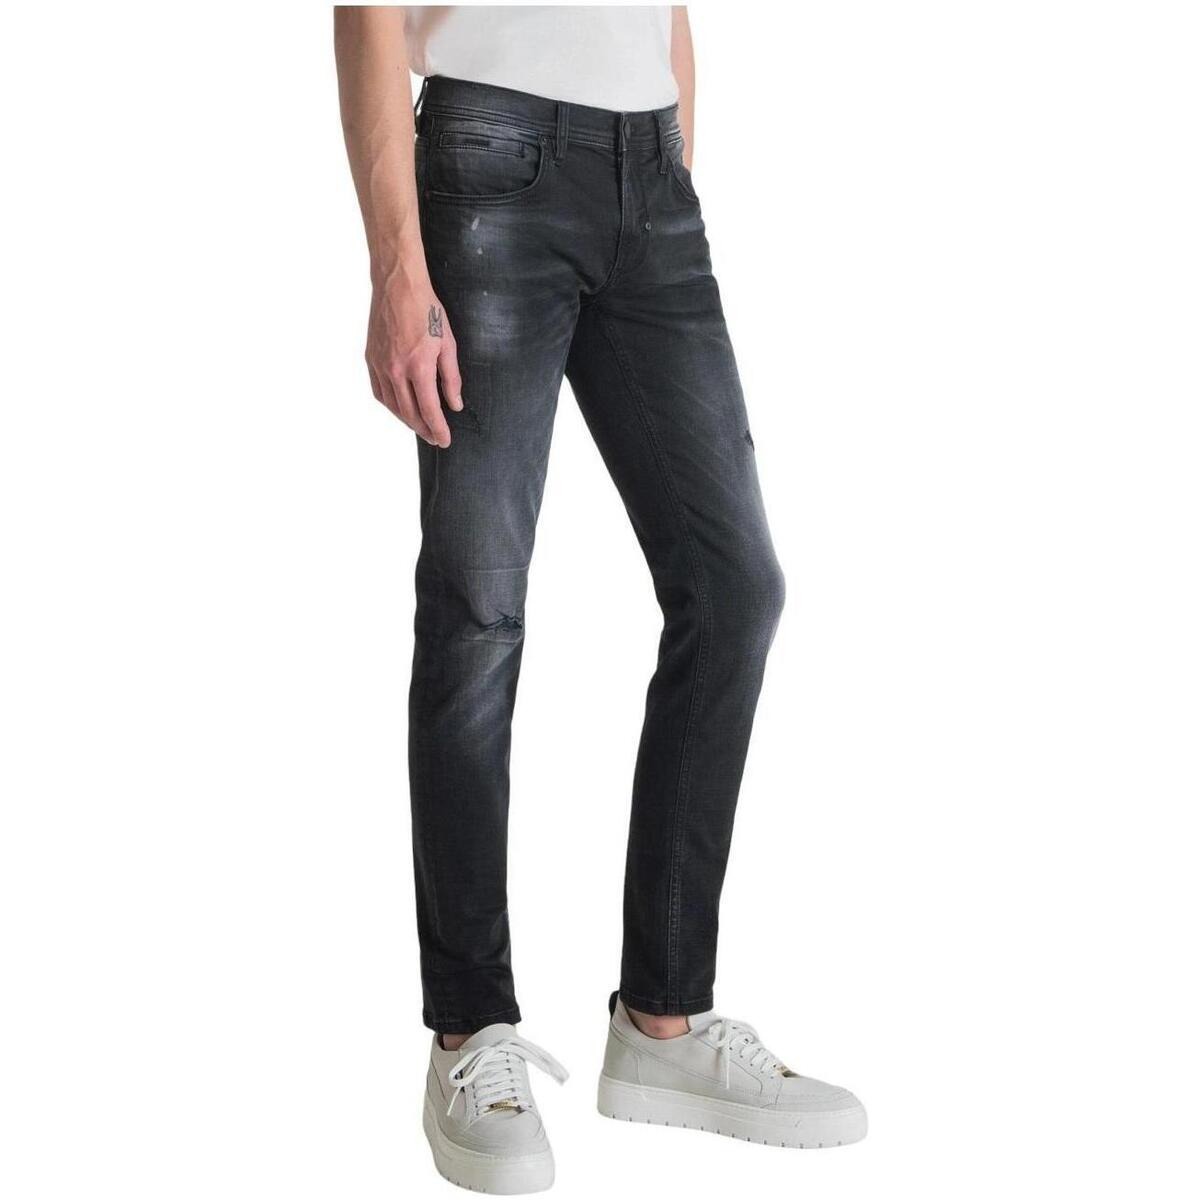 Mens Jeans in Black by Spartoo GOOFASH